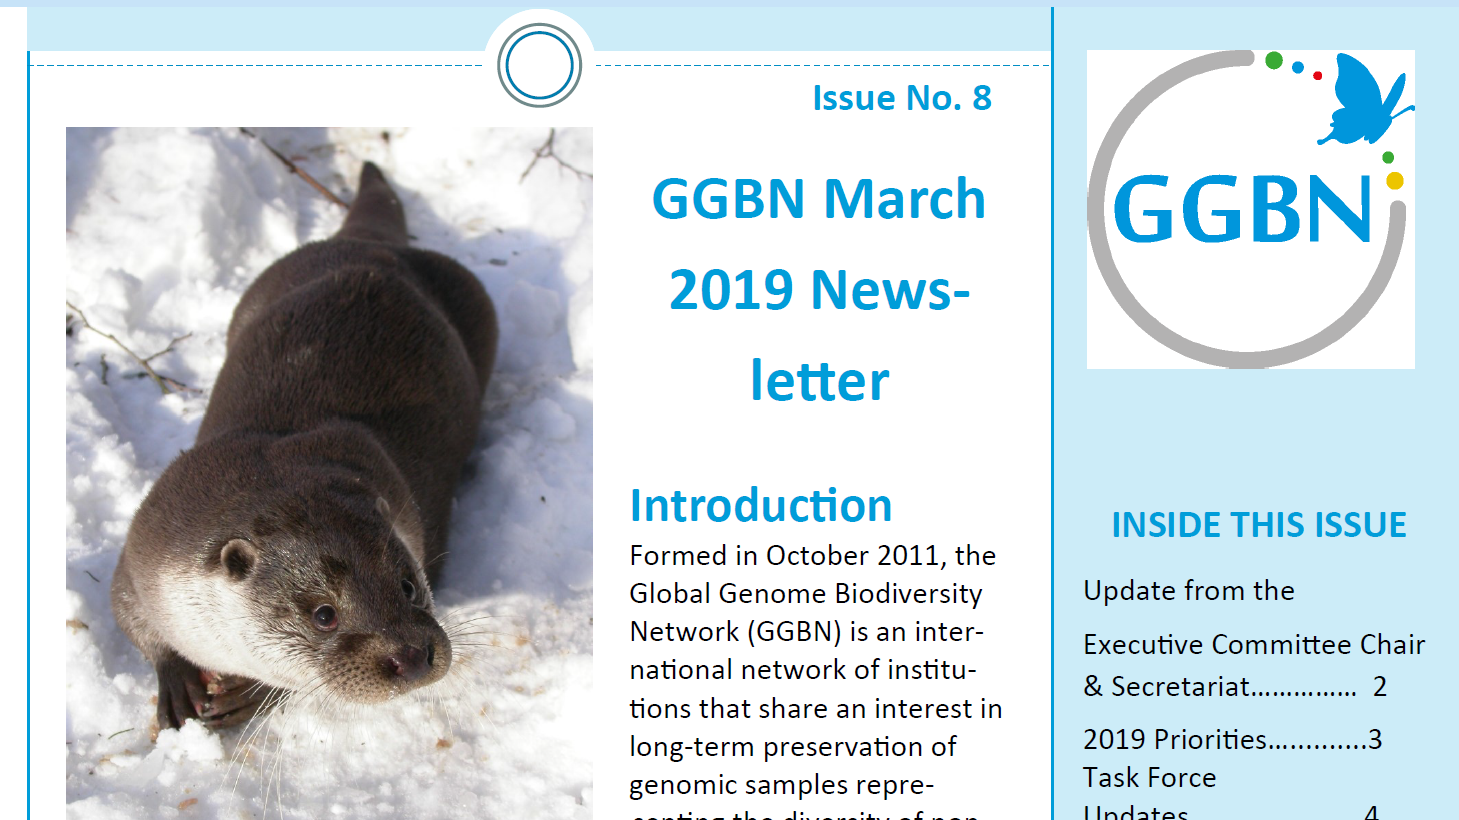 GGBN2019Newsletter.png